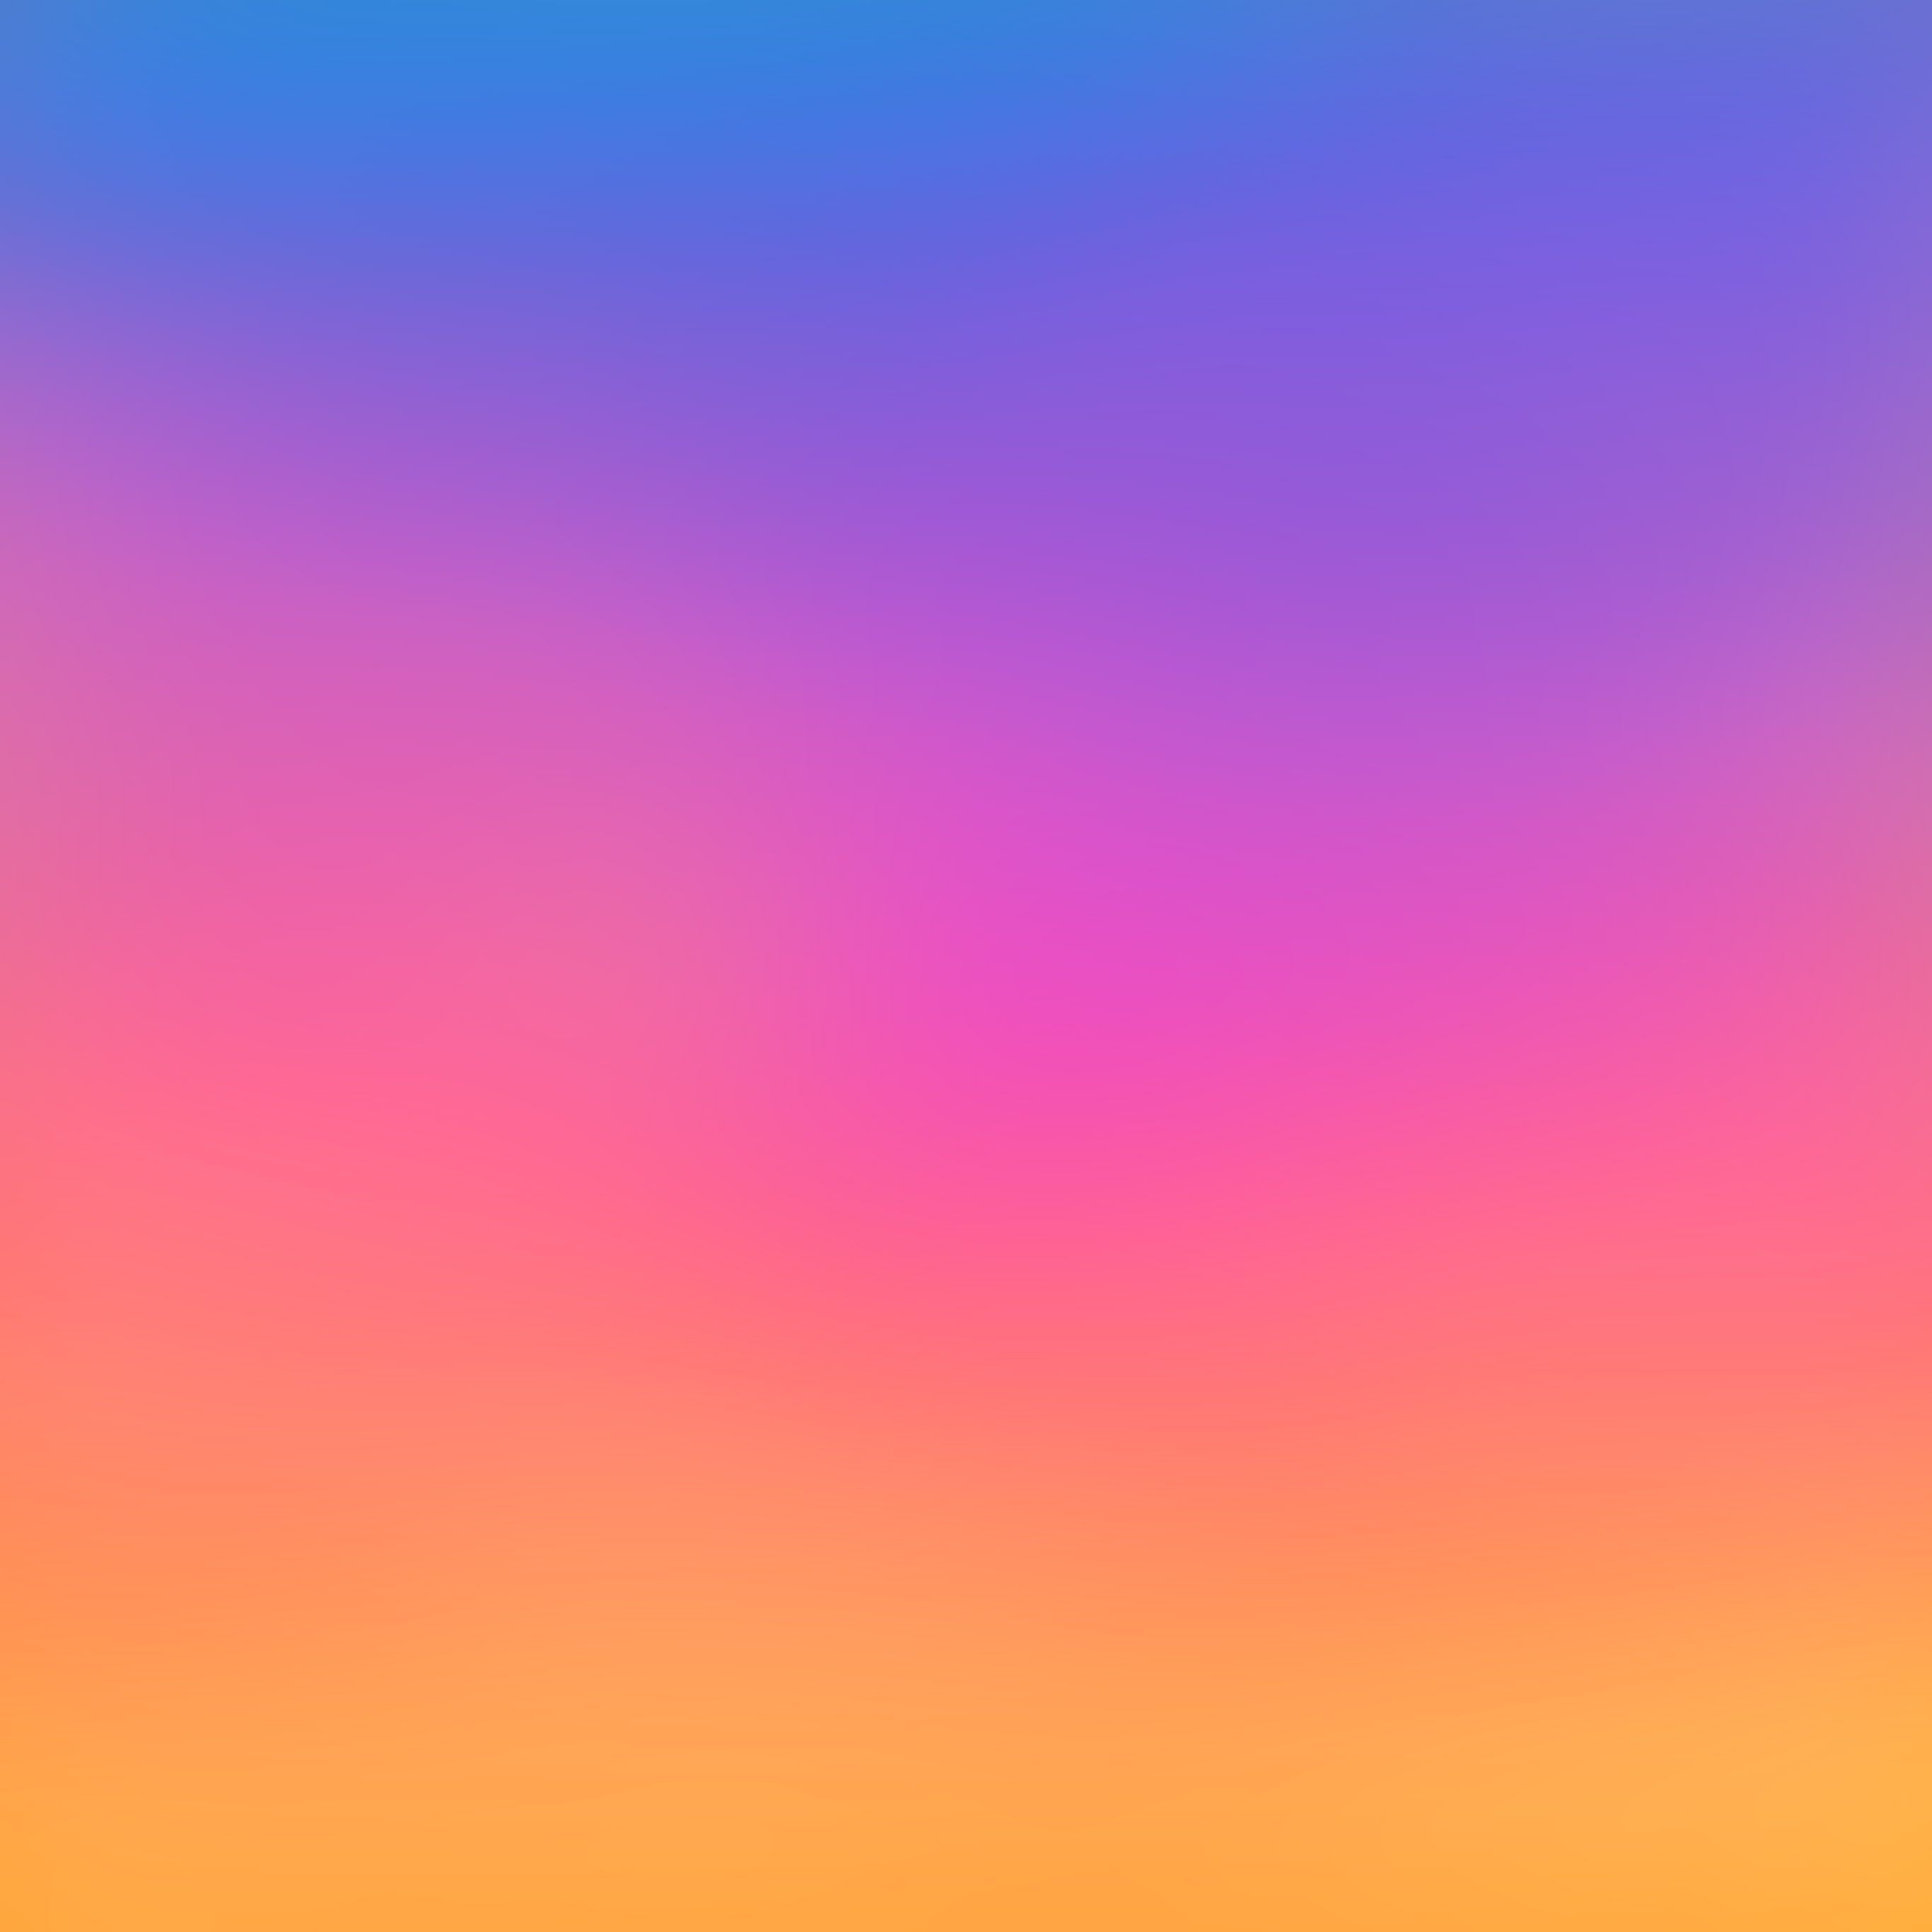 Pink Yellow and Blue Wallpaper Free Pink Yellow and Blue Background